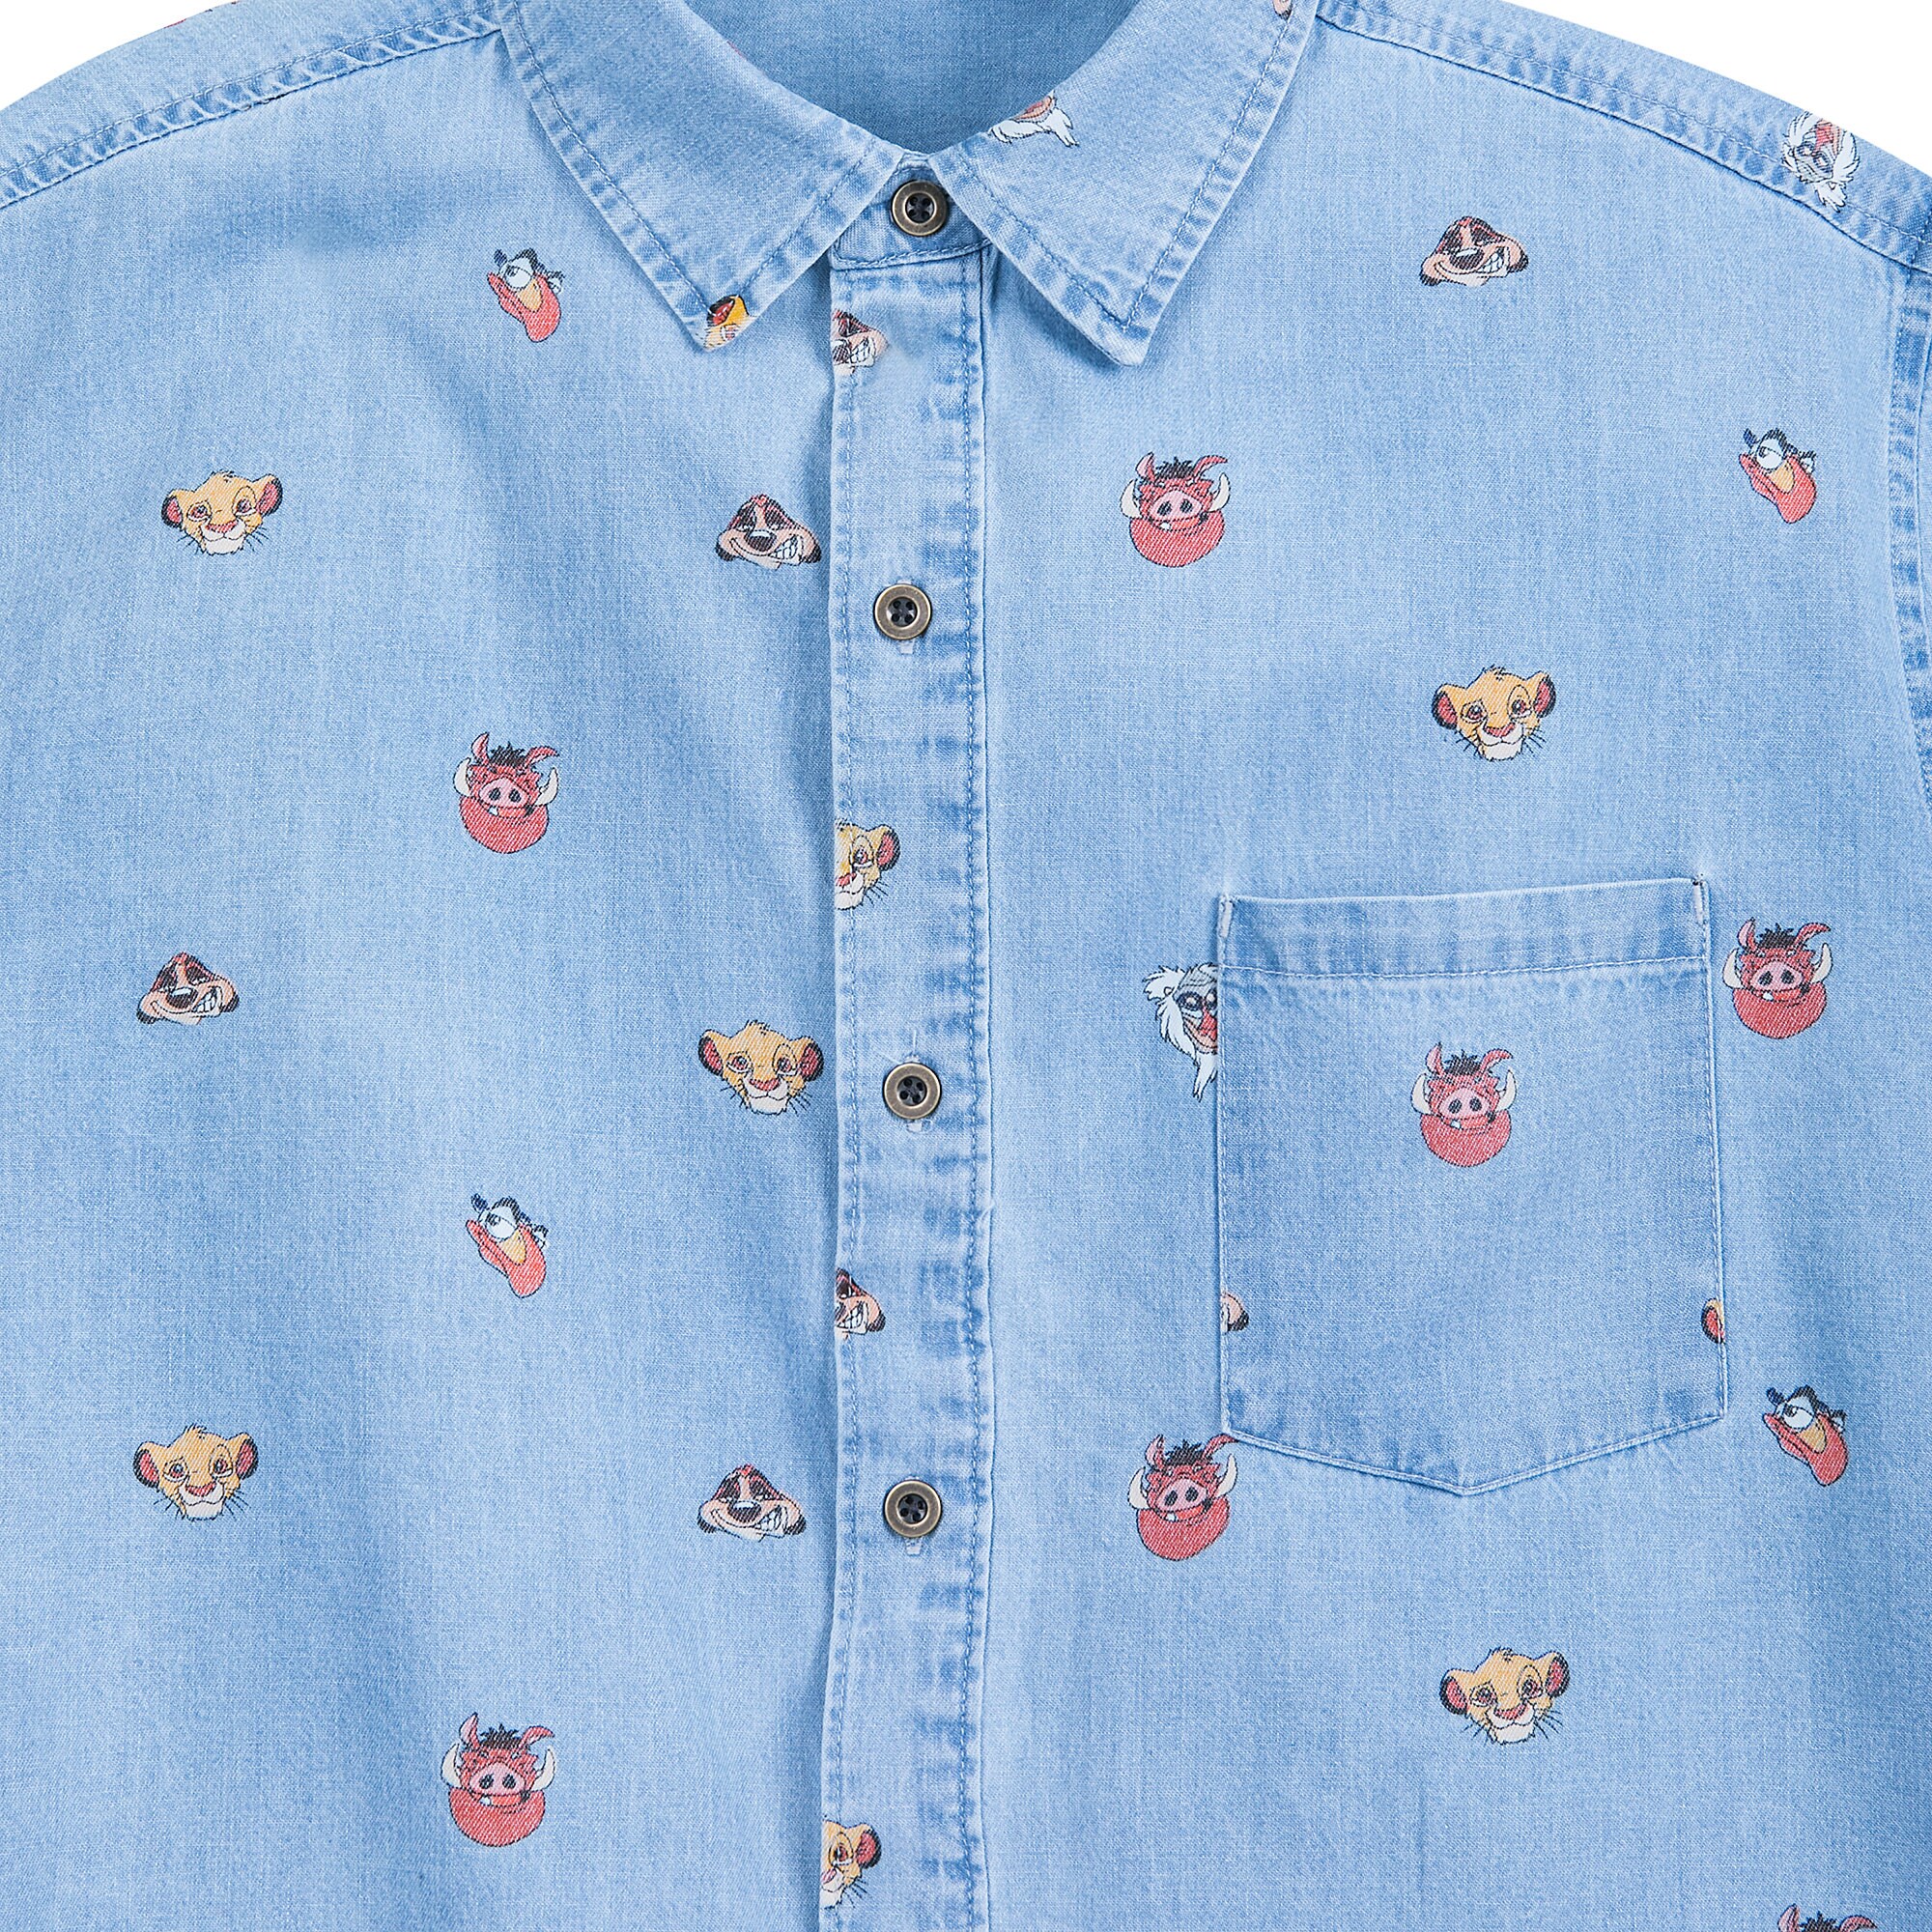 The Lion King Chambray Shirt for Men